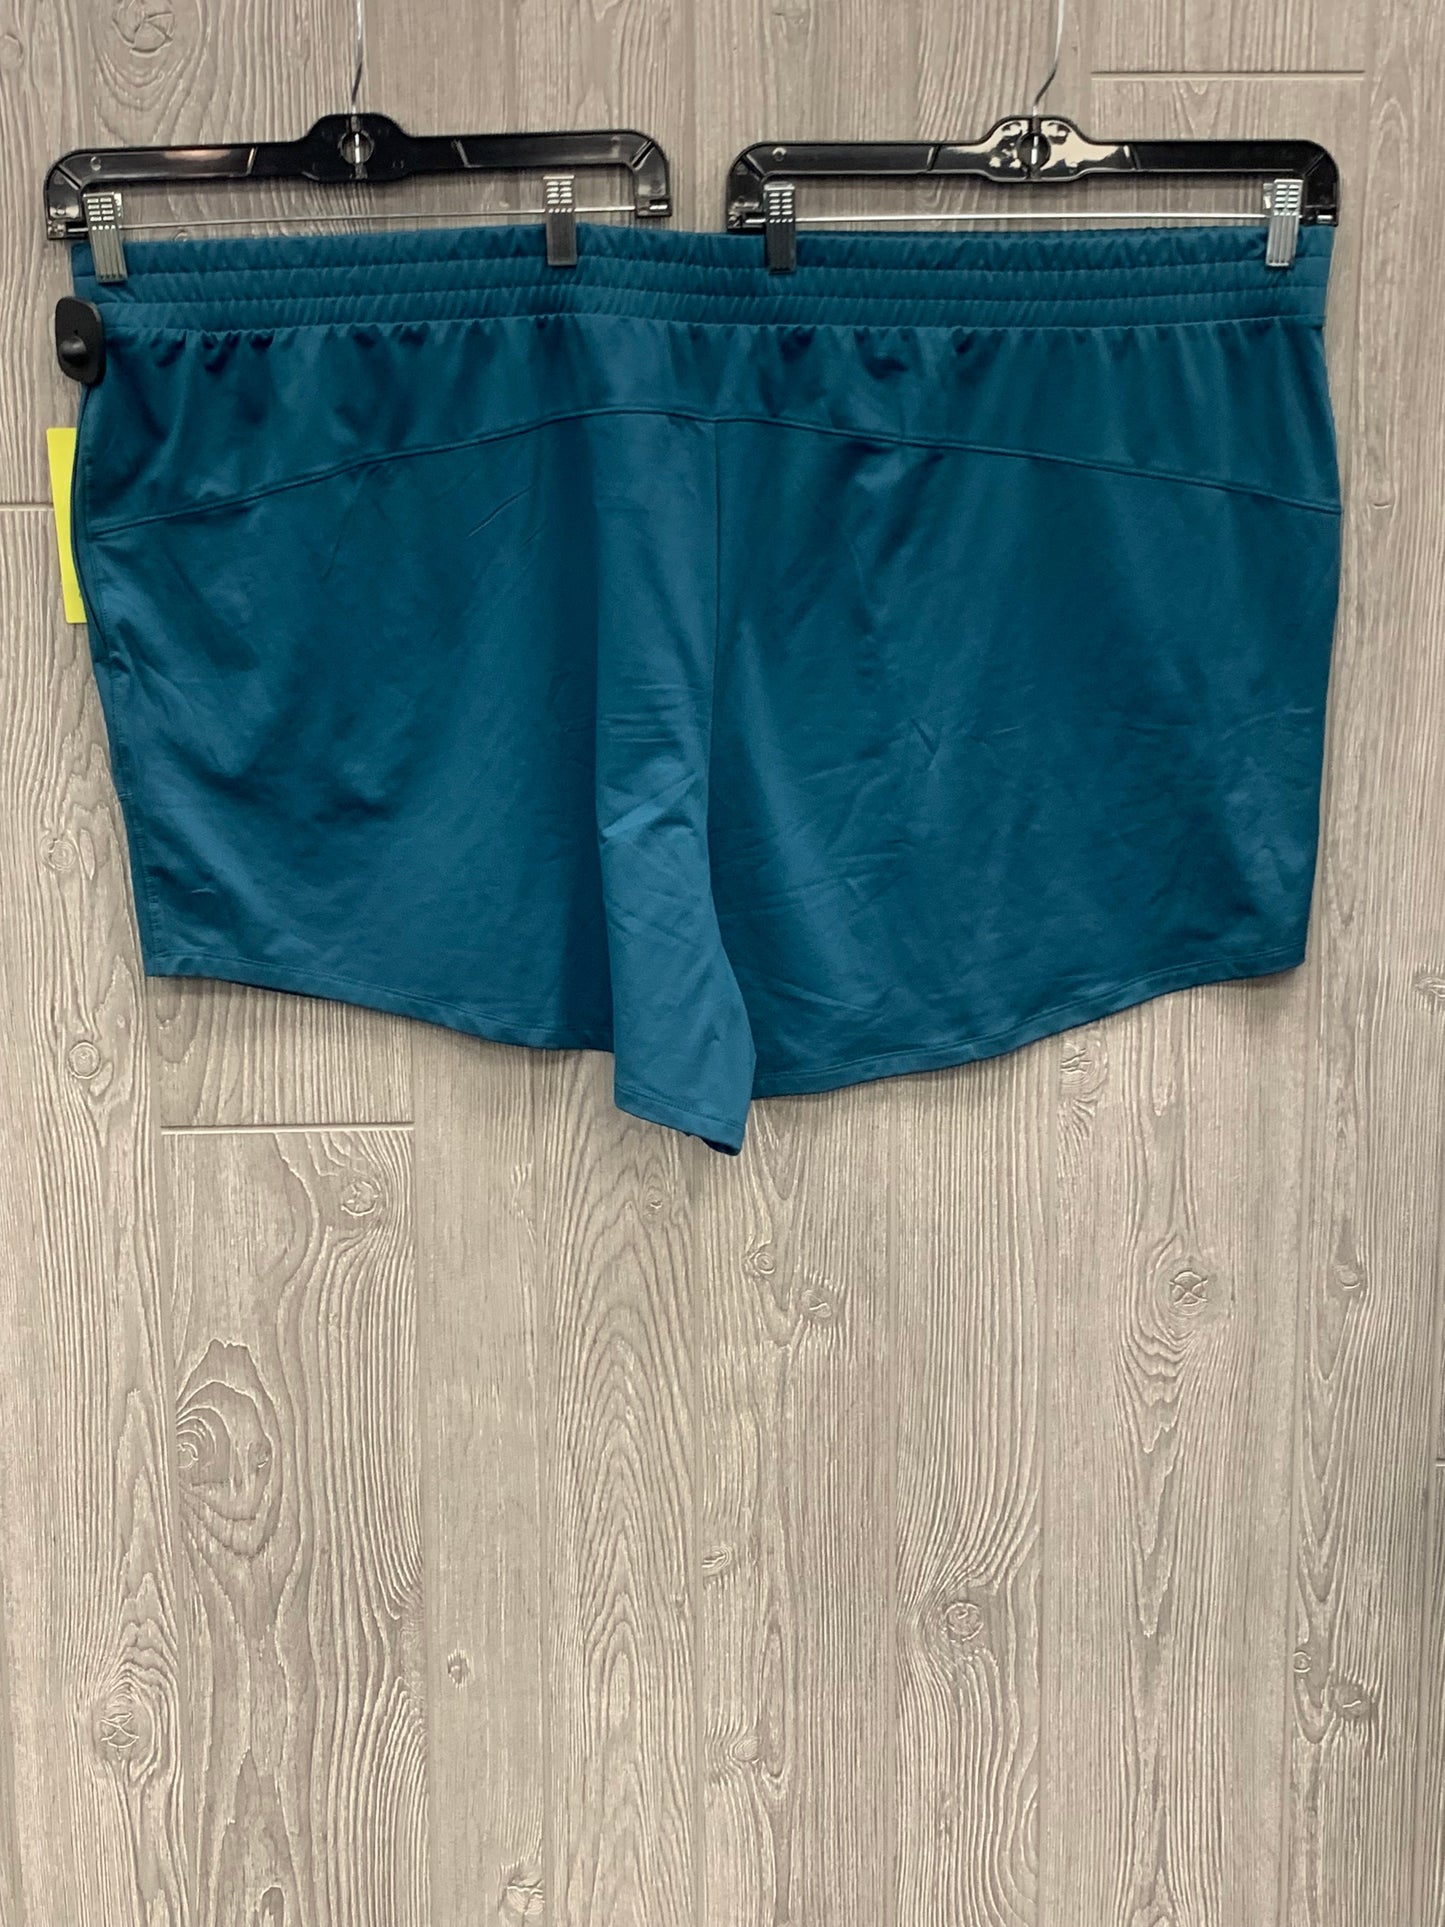 Athletic Shorts By All In Motion  Size: 4x